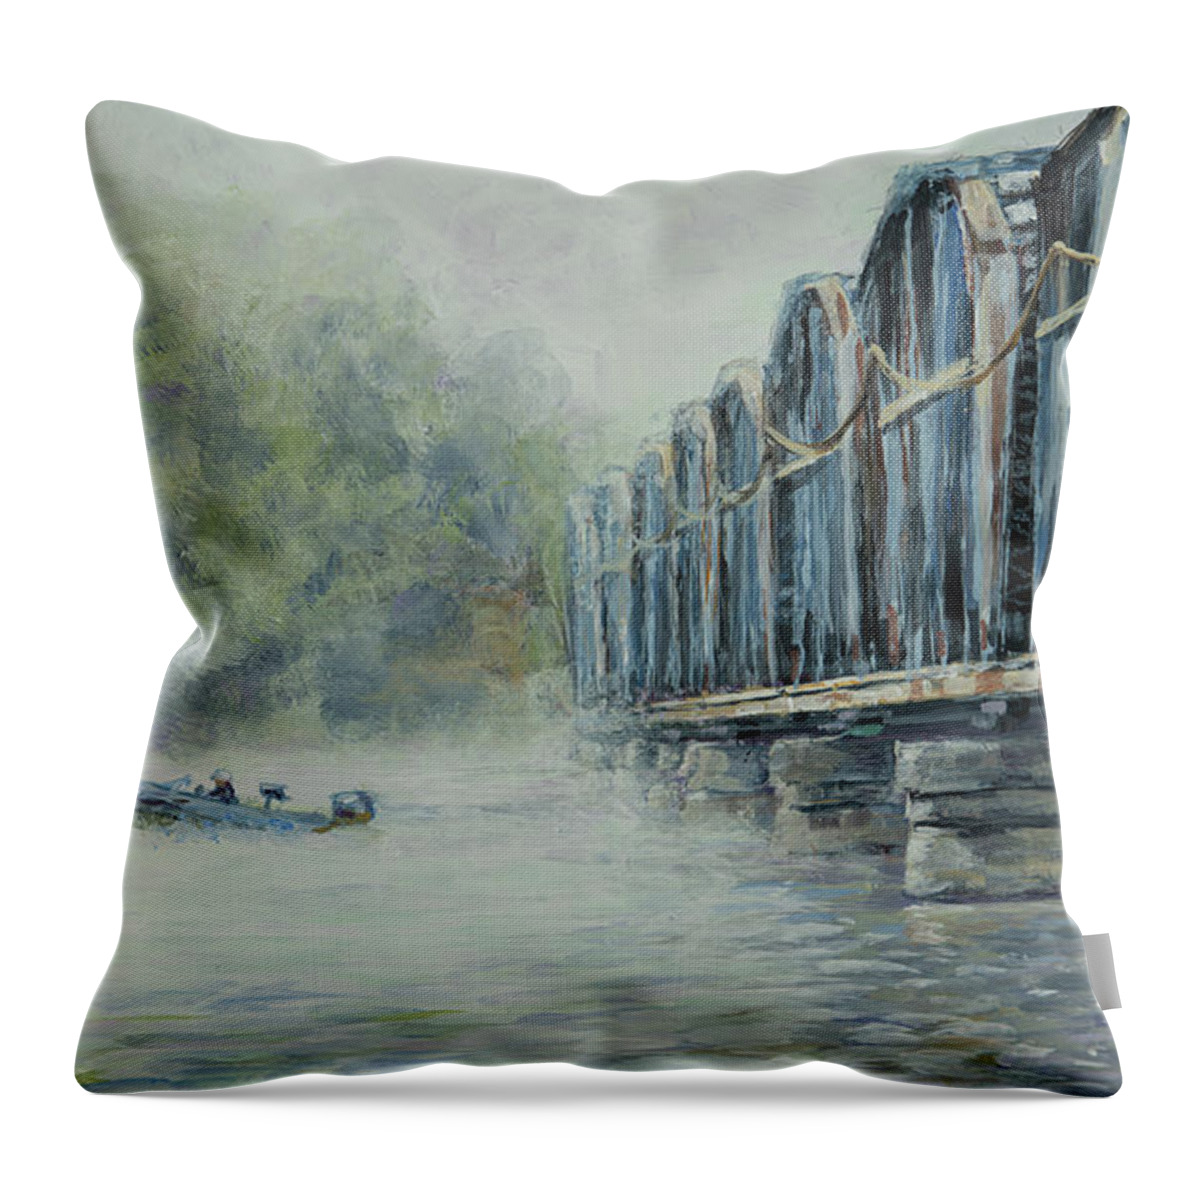 Acrylic Throw Pillow featuring the painting Fishin For Giants by Robert FERD Frank